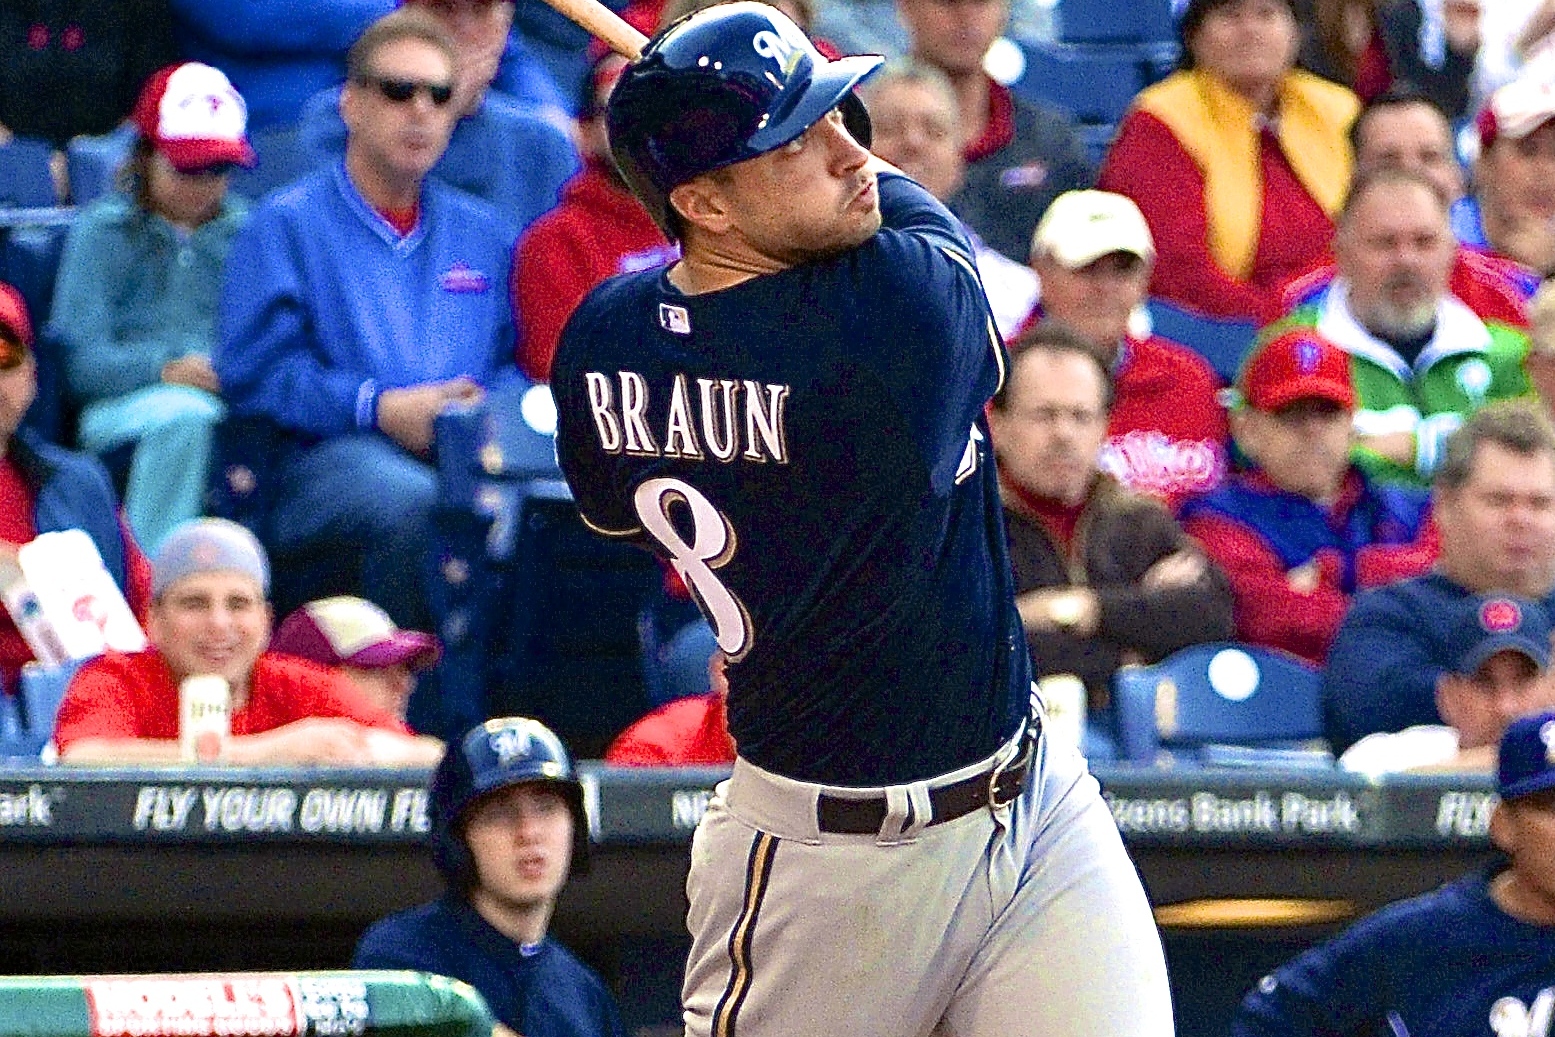 Ryan Braun rejoins the Brewers lineup batting fifth for the first time  since 2008 - NBC Sports